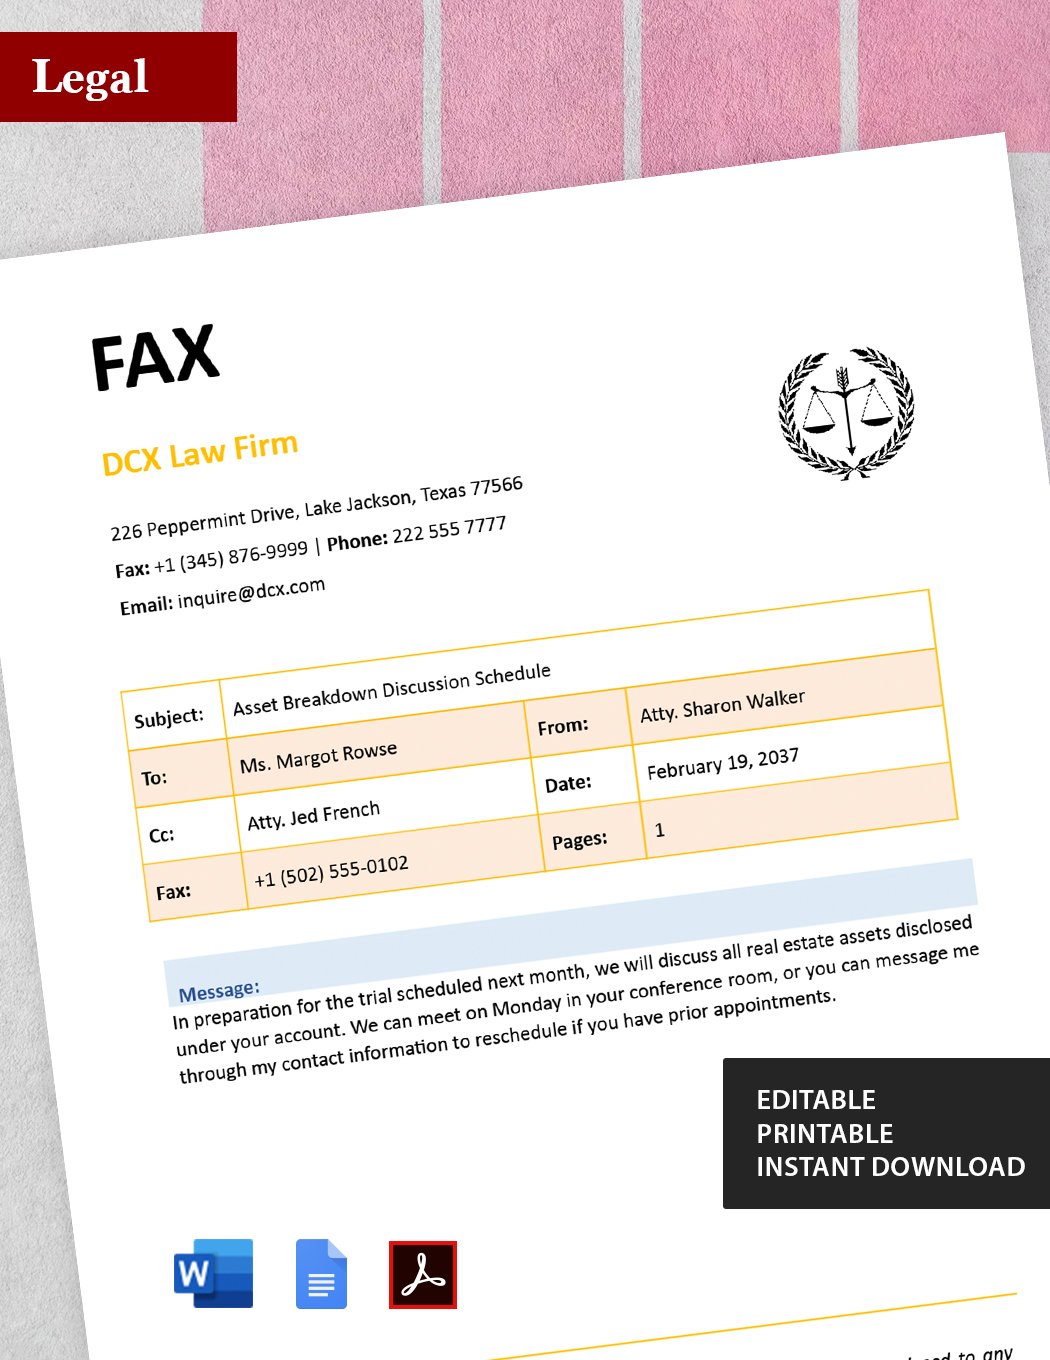 Real Estate Fax Cover Sheet Template